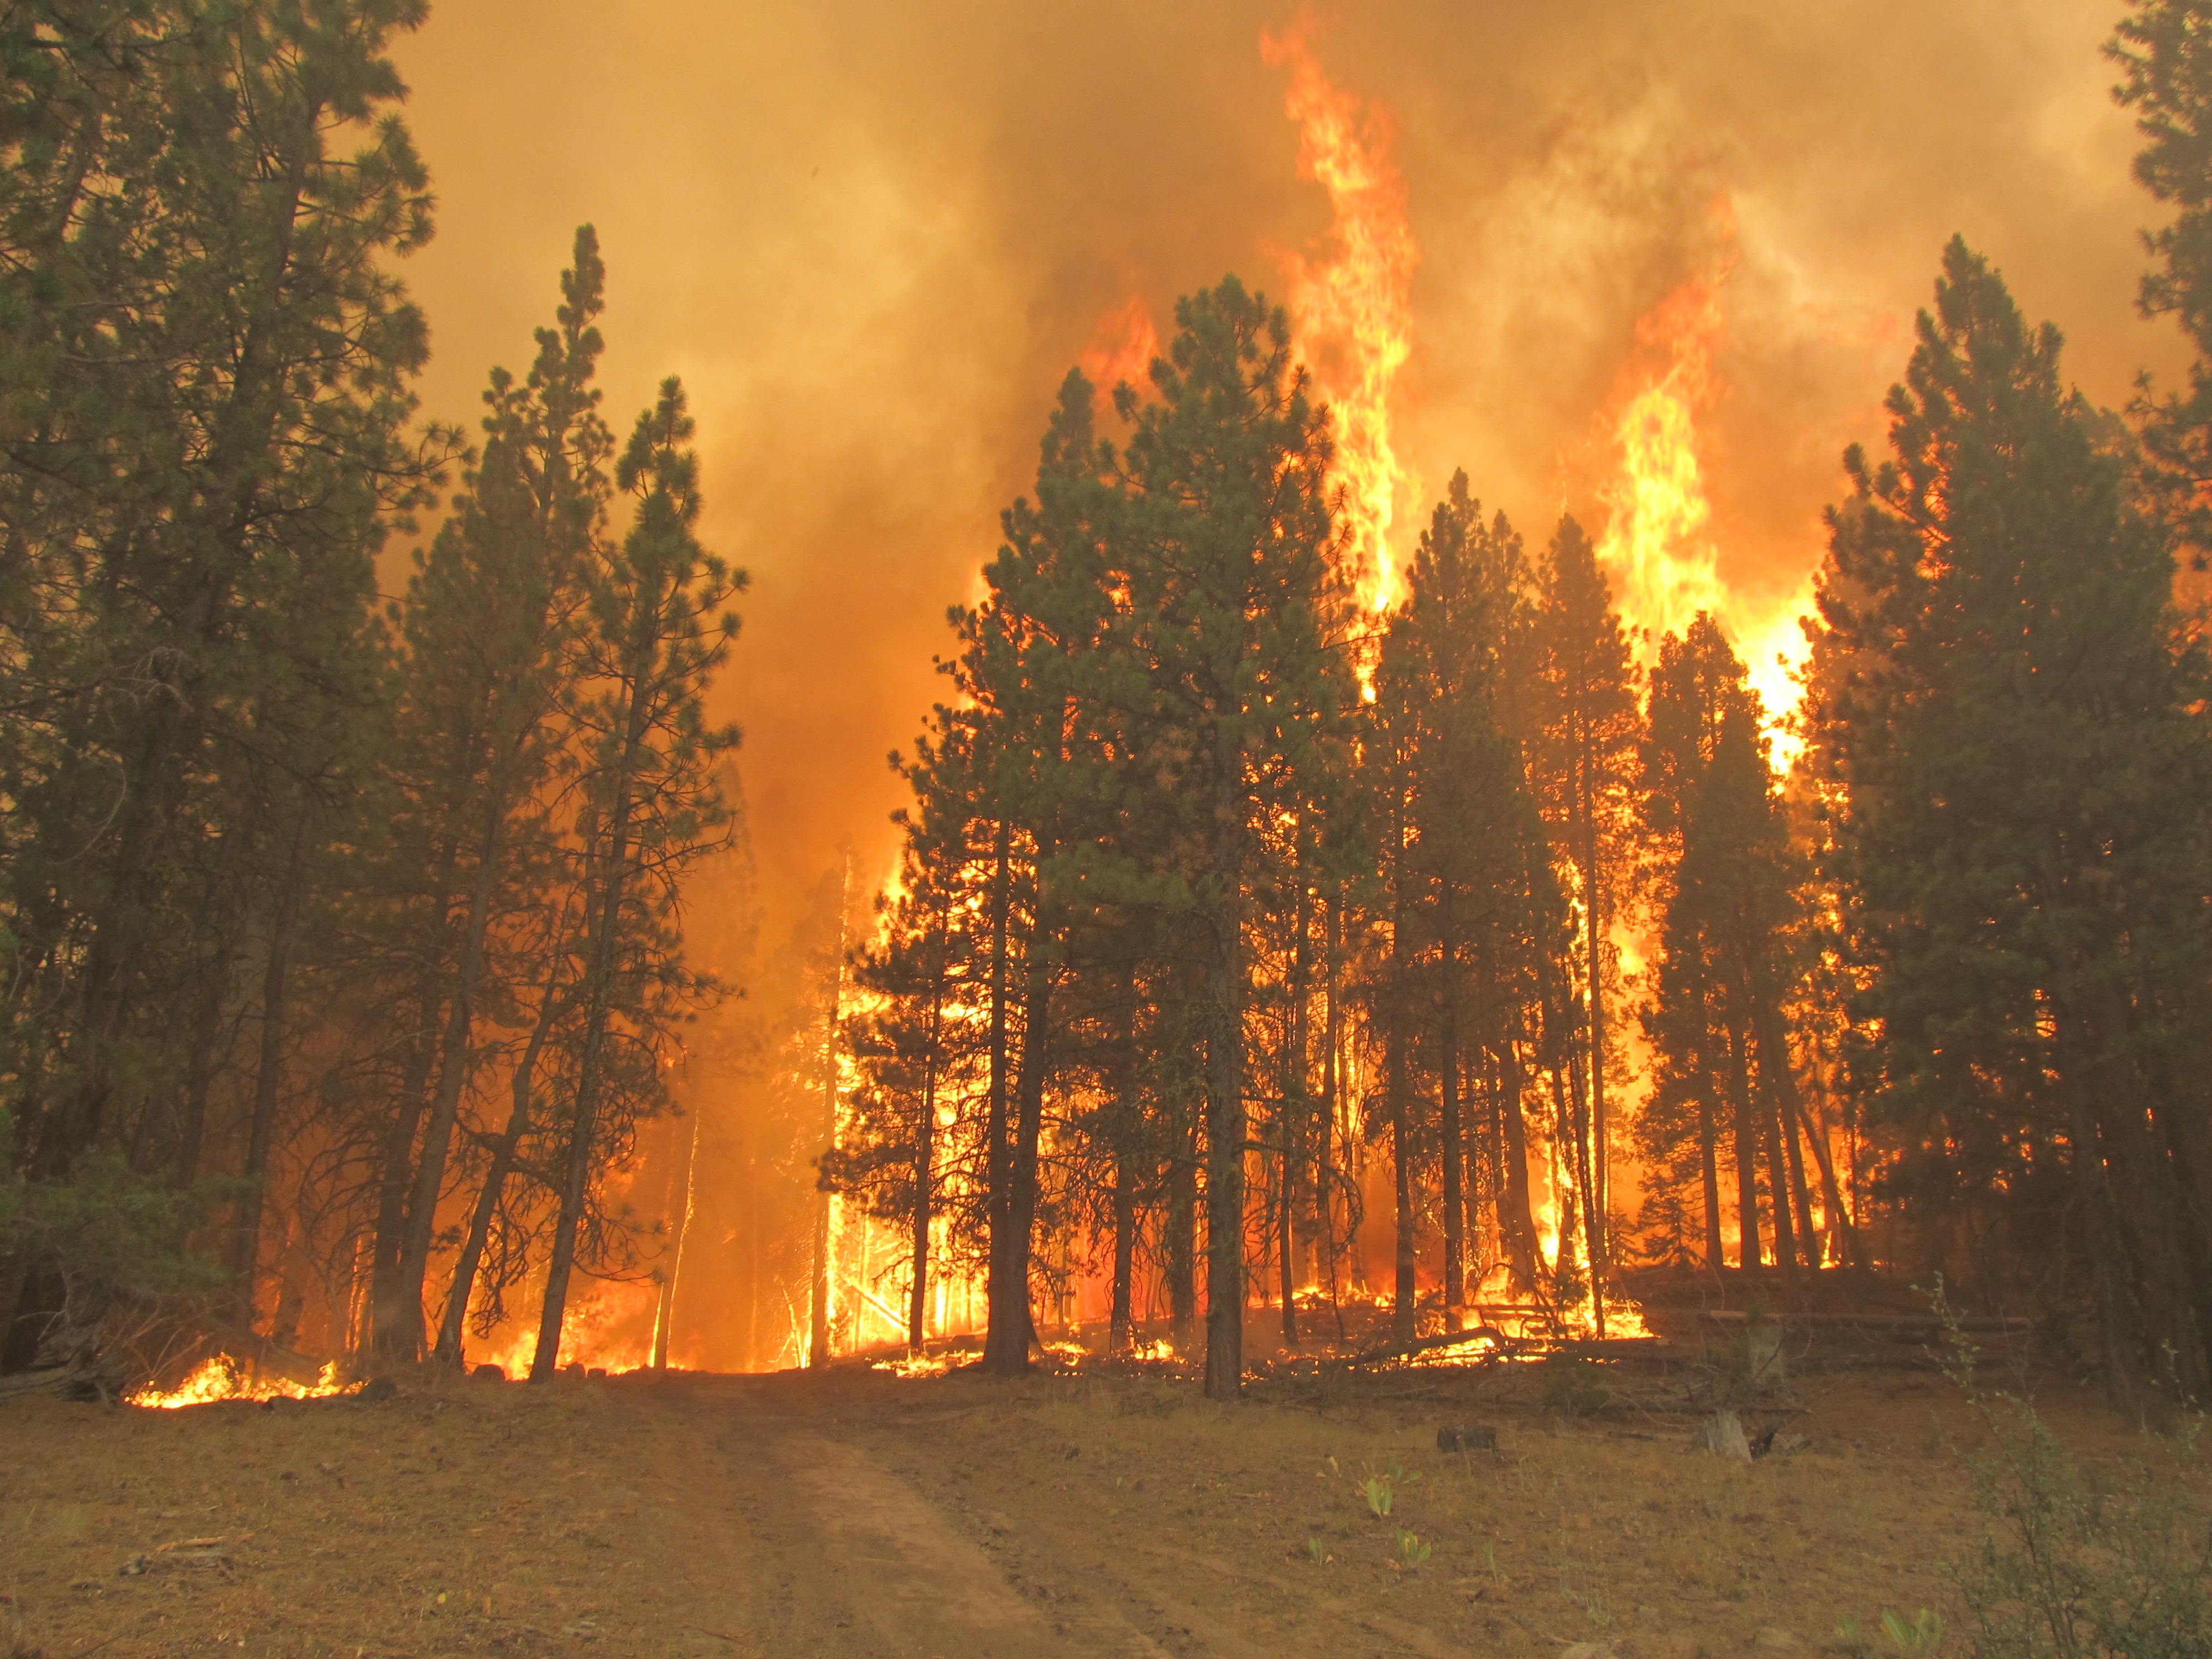 The Barry Point Wildfire ablaze in 2012. The burn scar (where most of the forest and plant cover has been lost) is almost 7 miles wide and 6 miles long.